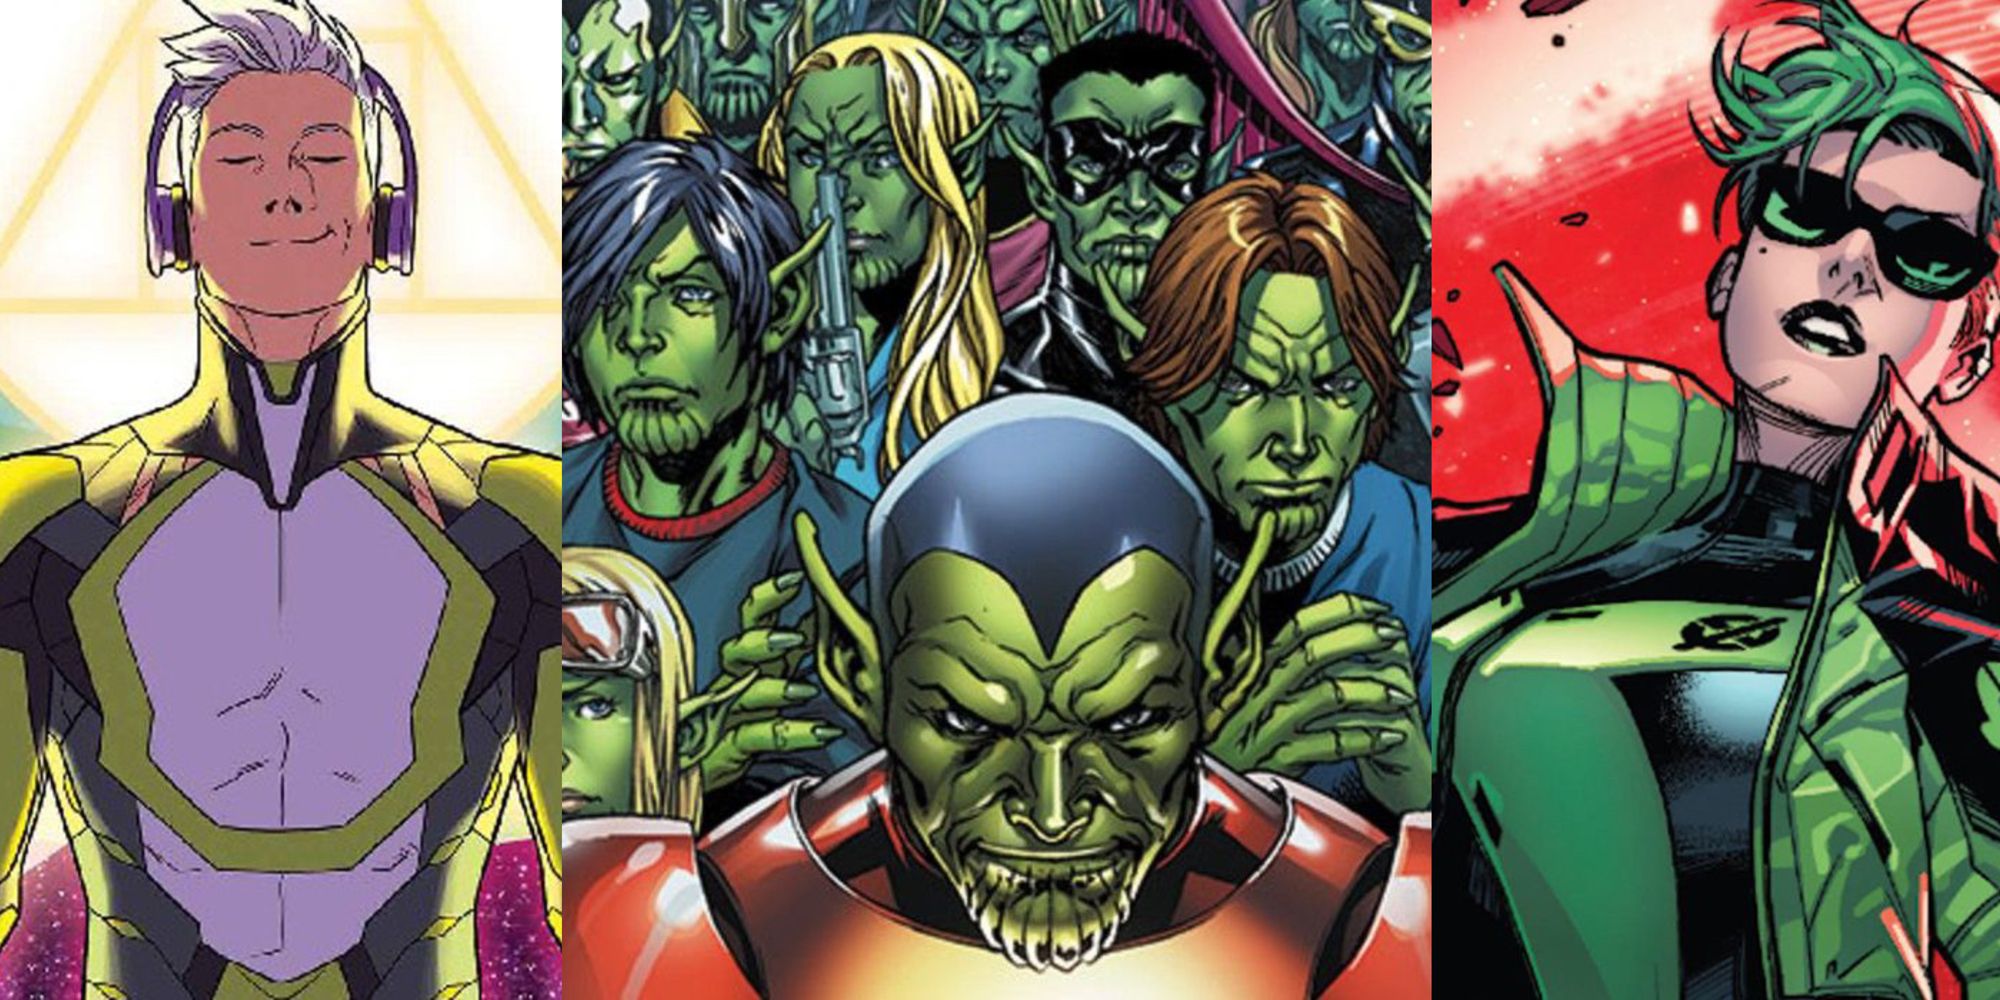 Secret Invasion Cast Guide: All New & Returning Marvel Characters